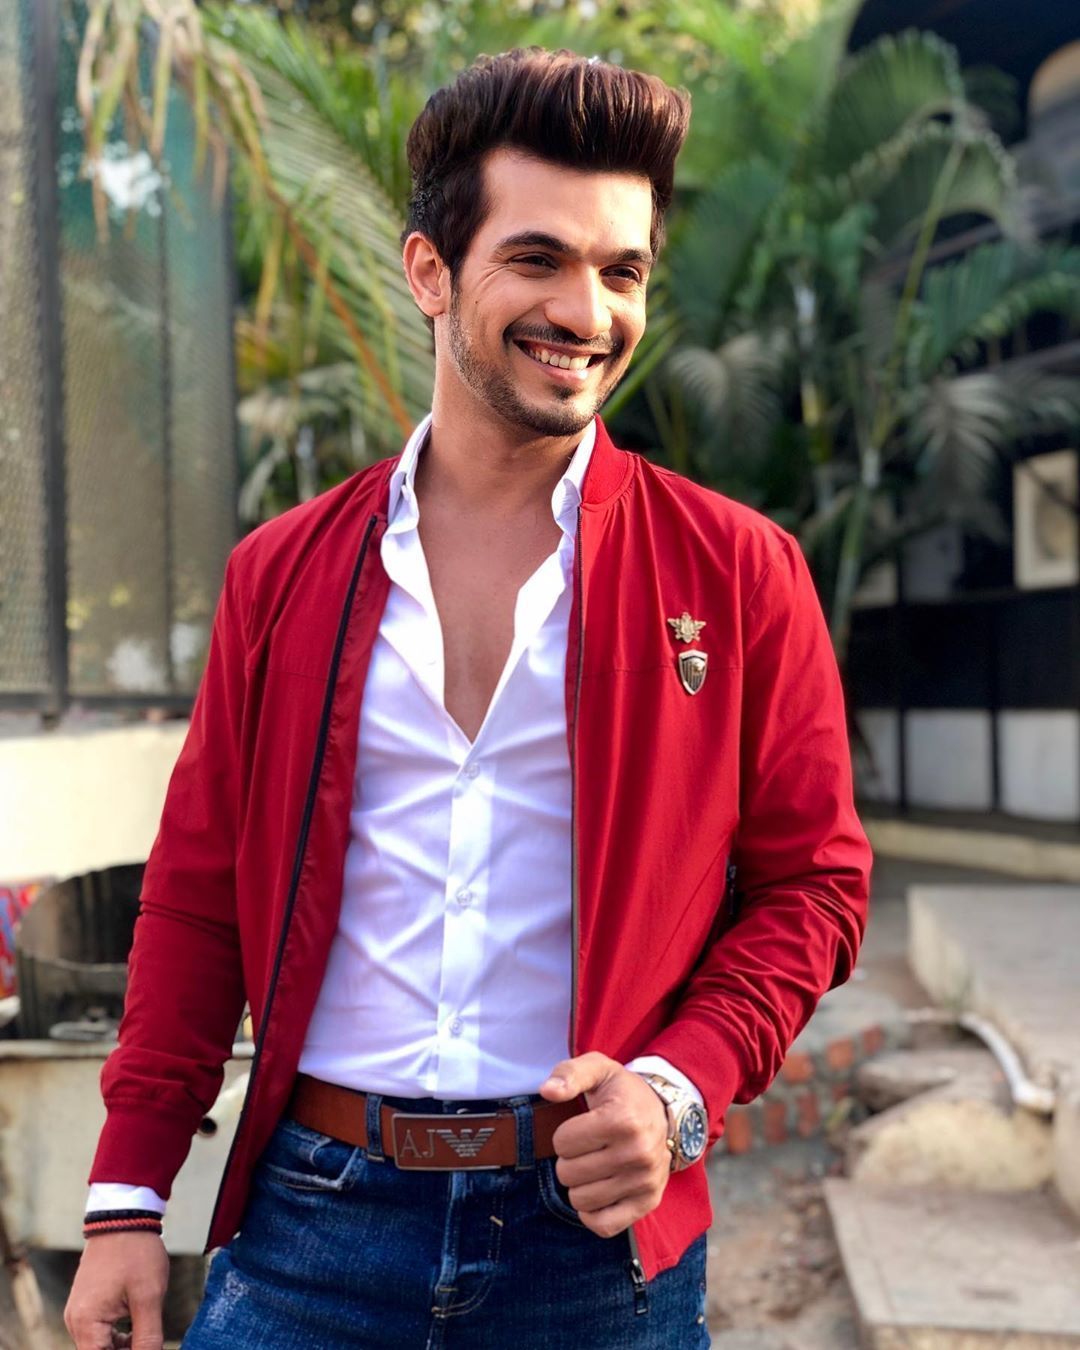 Bigg Boss 15: Arjun Bijlani confirms being approached for the controversial reality show